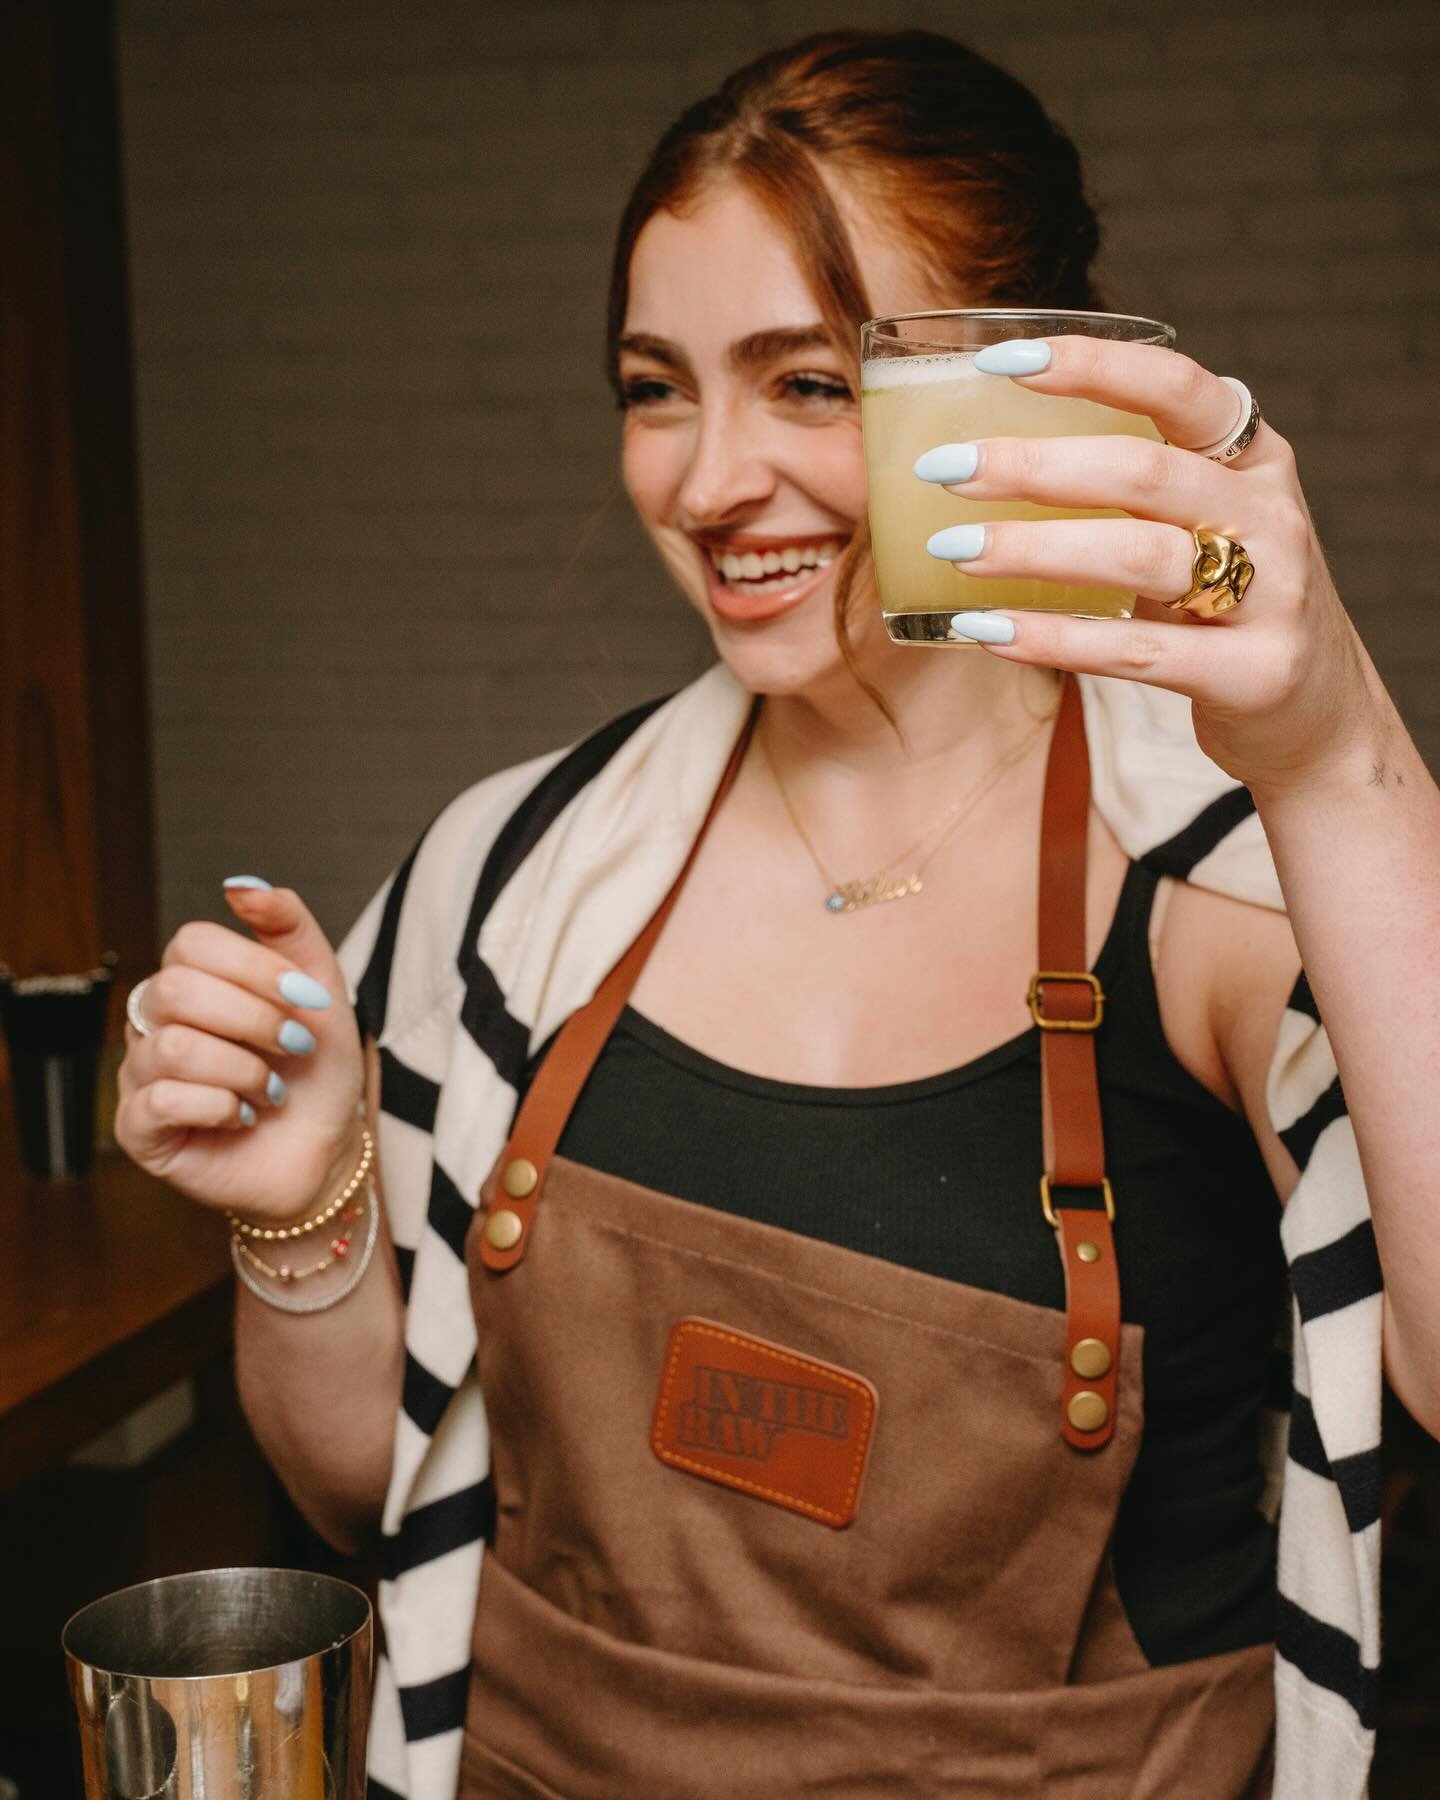 Our Palihouse West Hollywood Pop-up with @intheraw brought the swice. The @palisociety team created a custom-collab menu of food and drinks featuring the full in the raw portfolio, teaching guests how to whip them up behind the bar. Thanks to all who